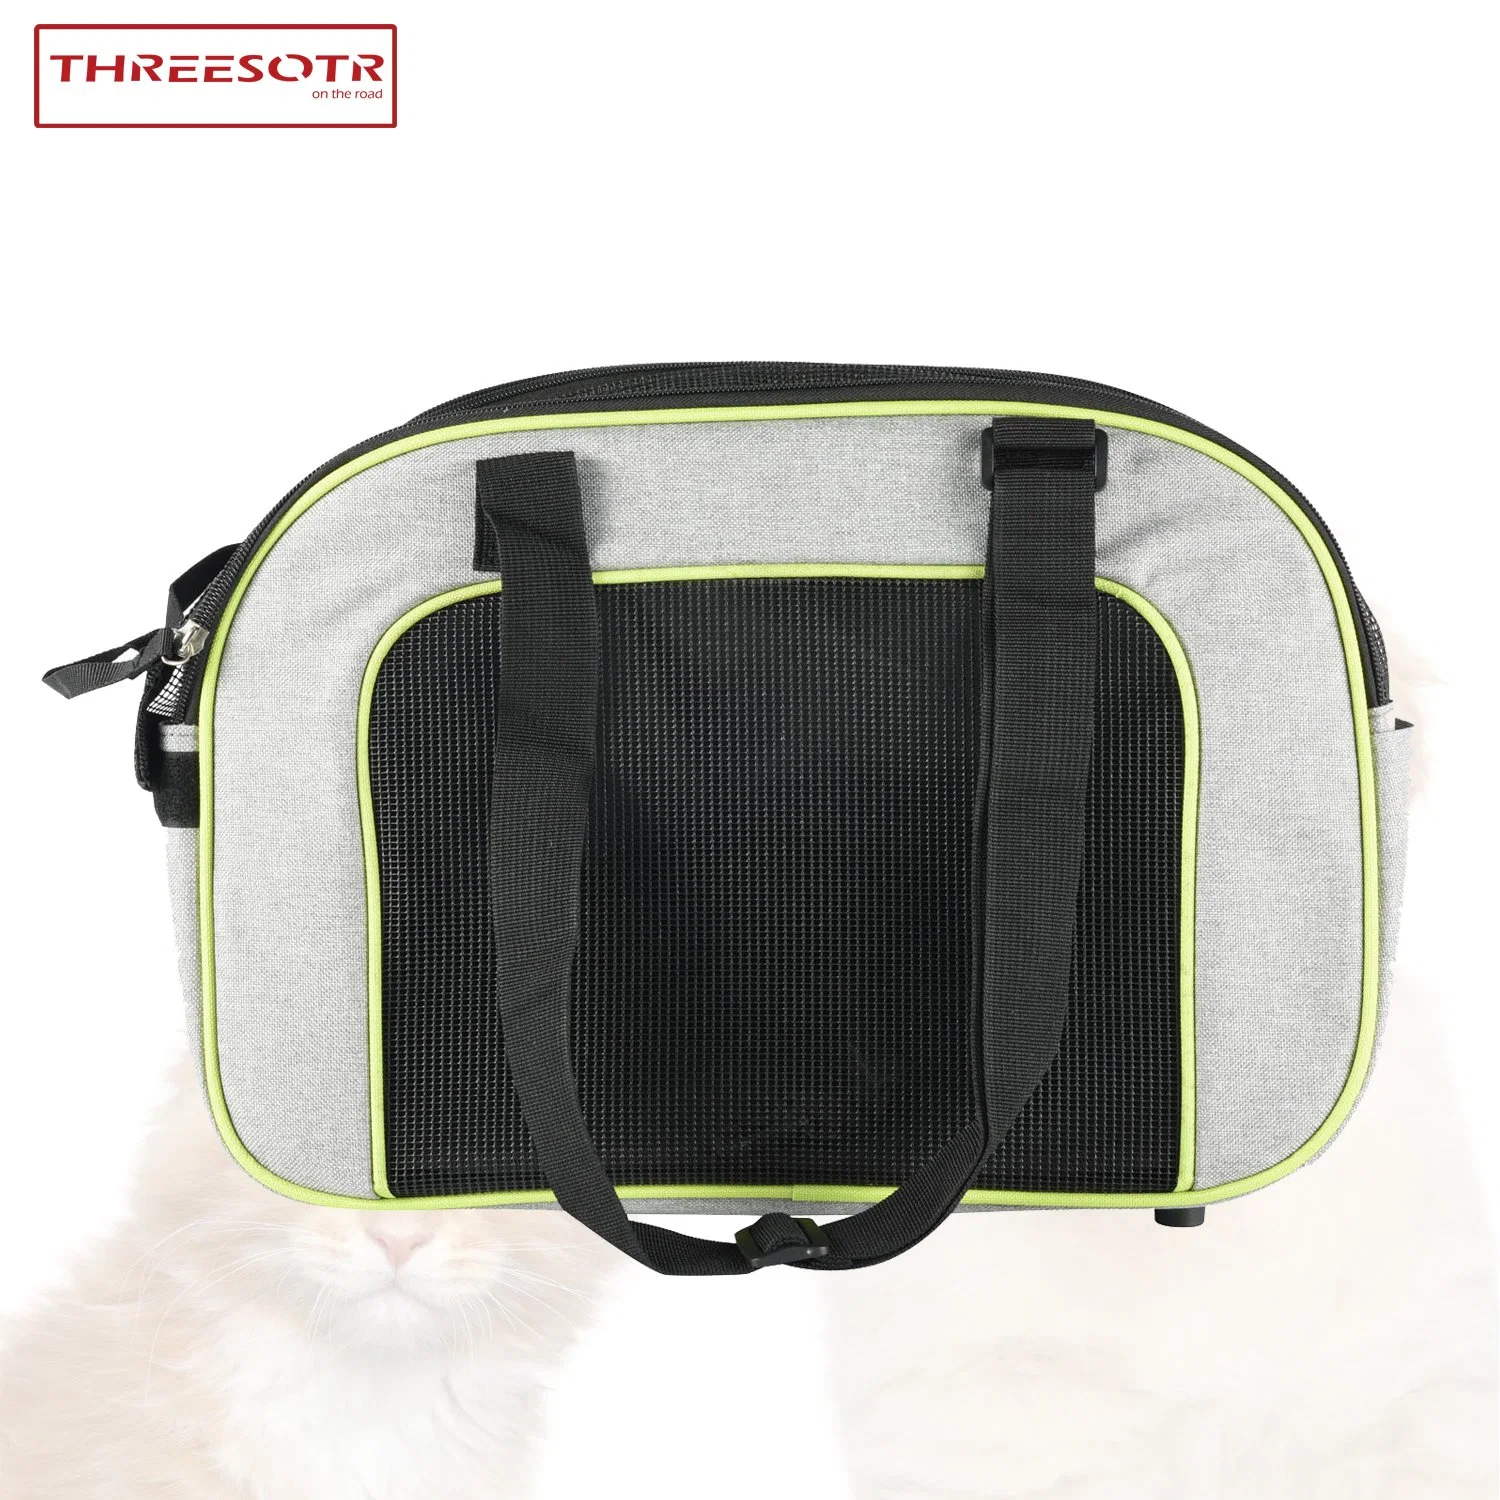 Small Pet Dog Travel Carrier Bag